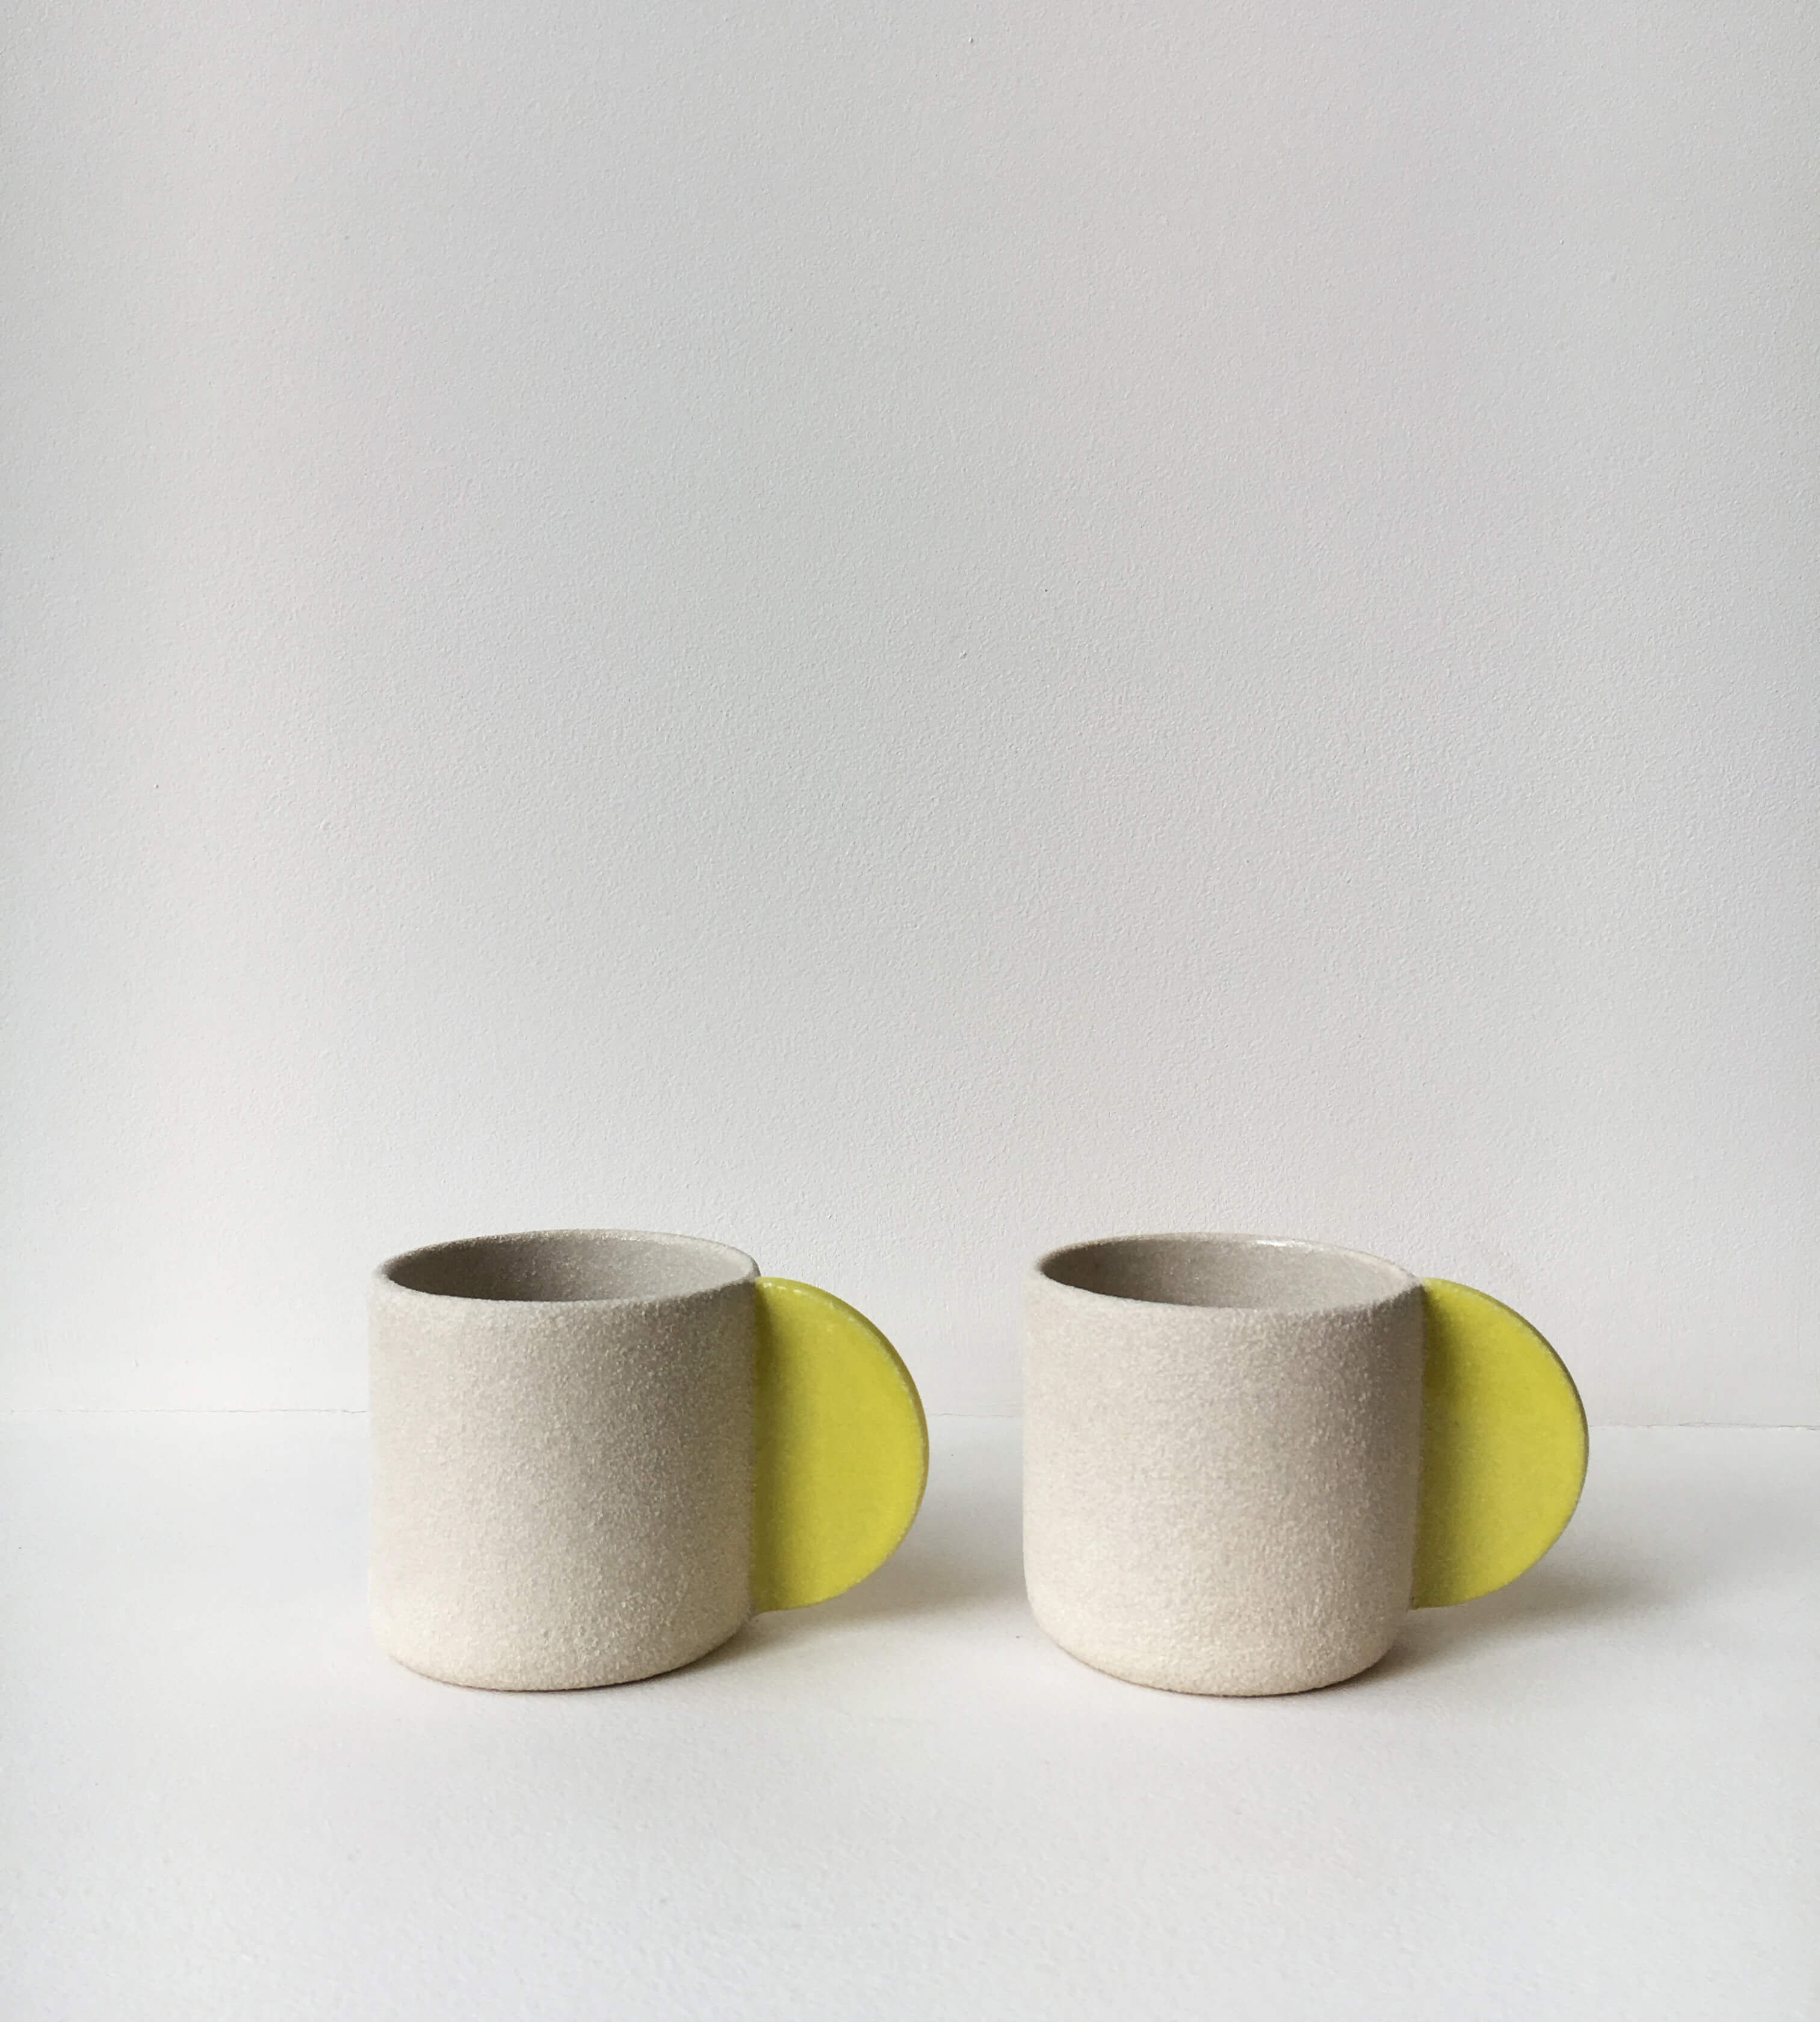 Bright Yellow Cup & Saucer | M - 180ml | Ceramic | by Brutes Ceramics - Lifestory - Brutes Ceramics